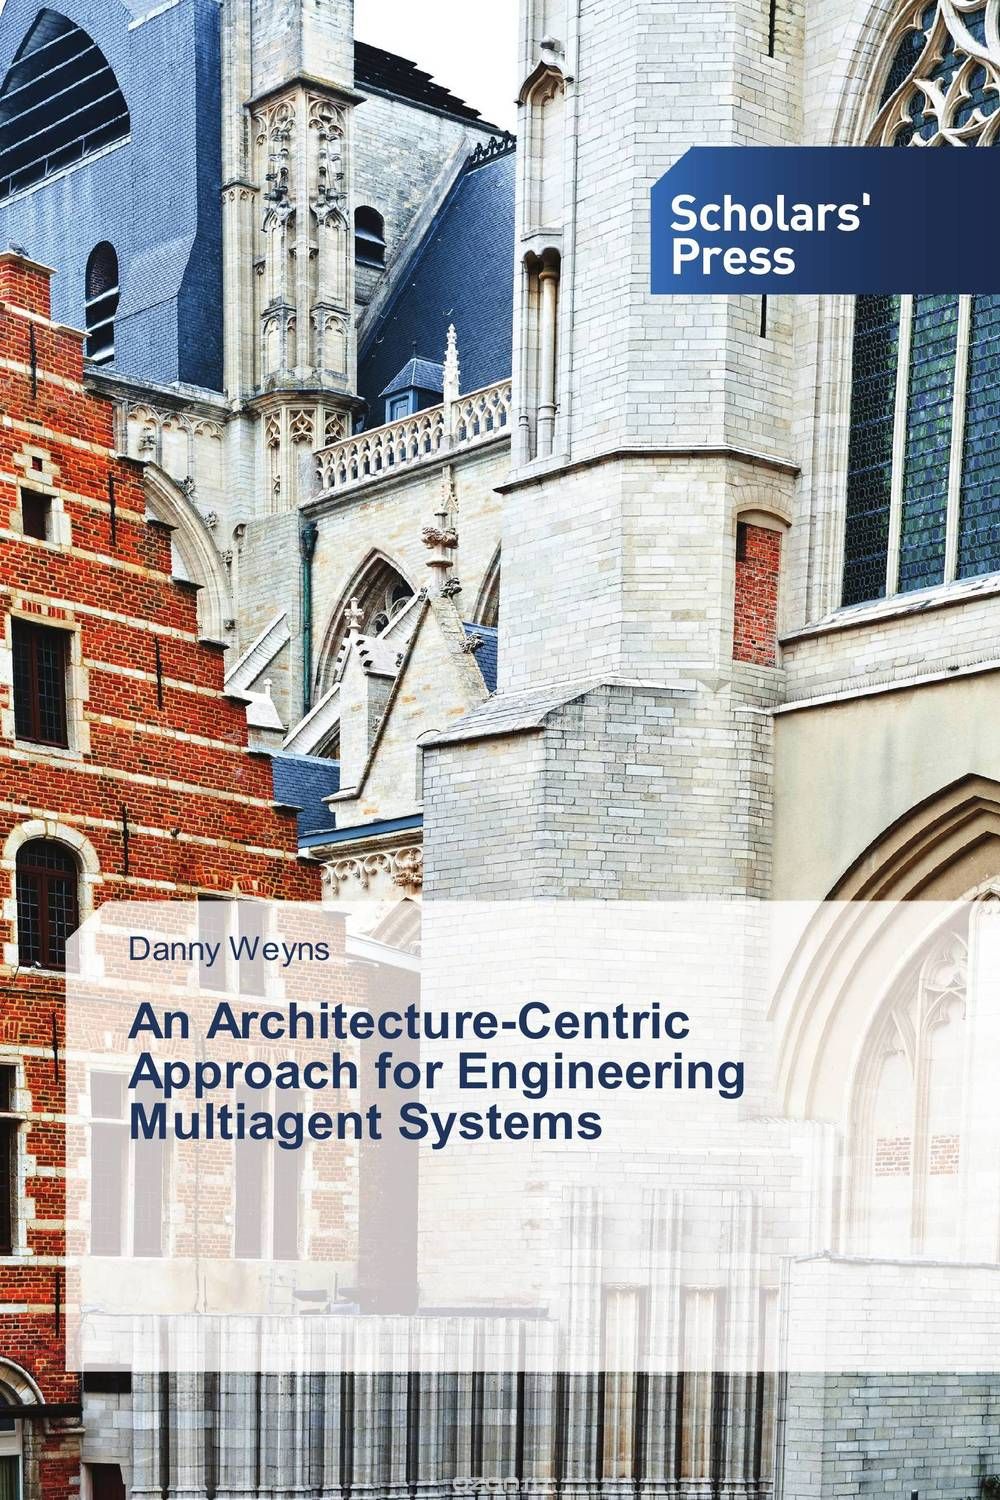 Скачать книгу "An Architecture-Centric Approach for Engineering Multiagent Systems"